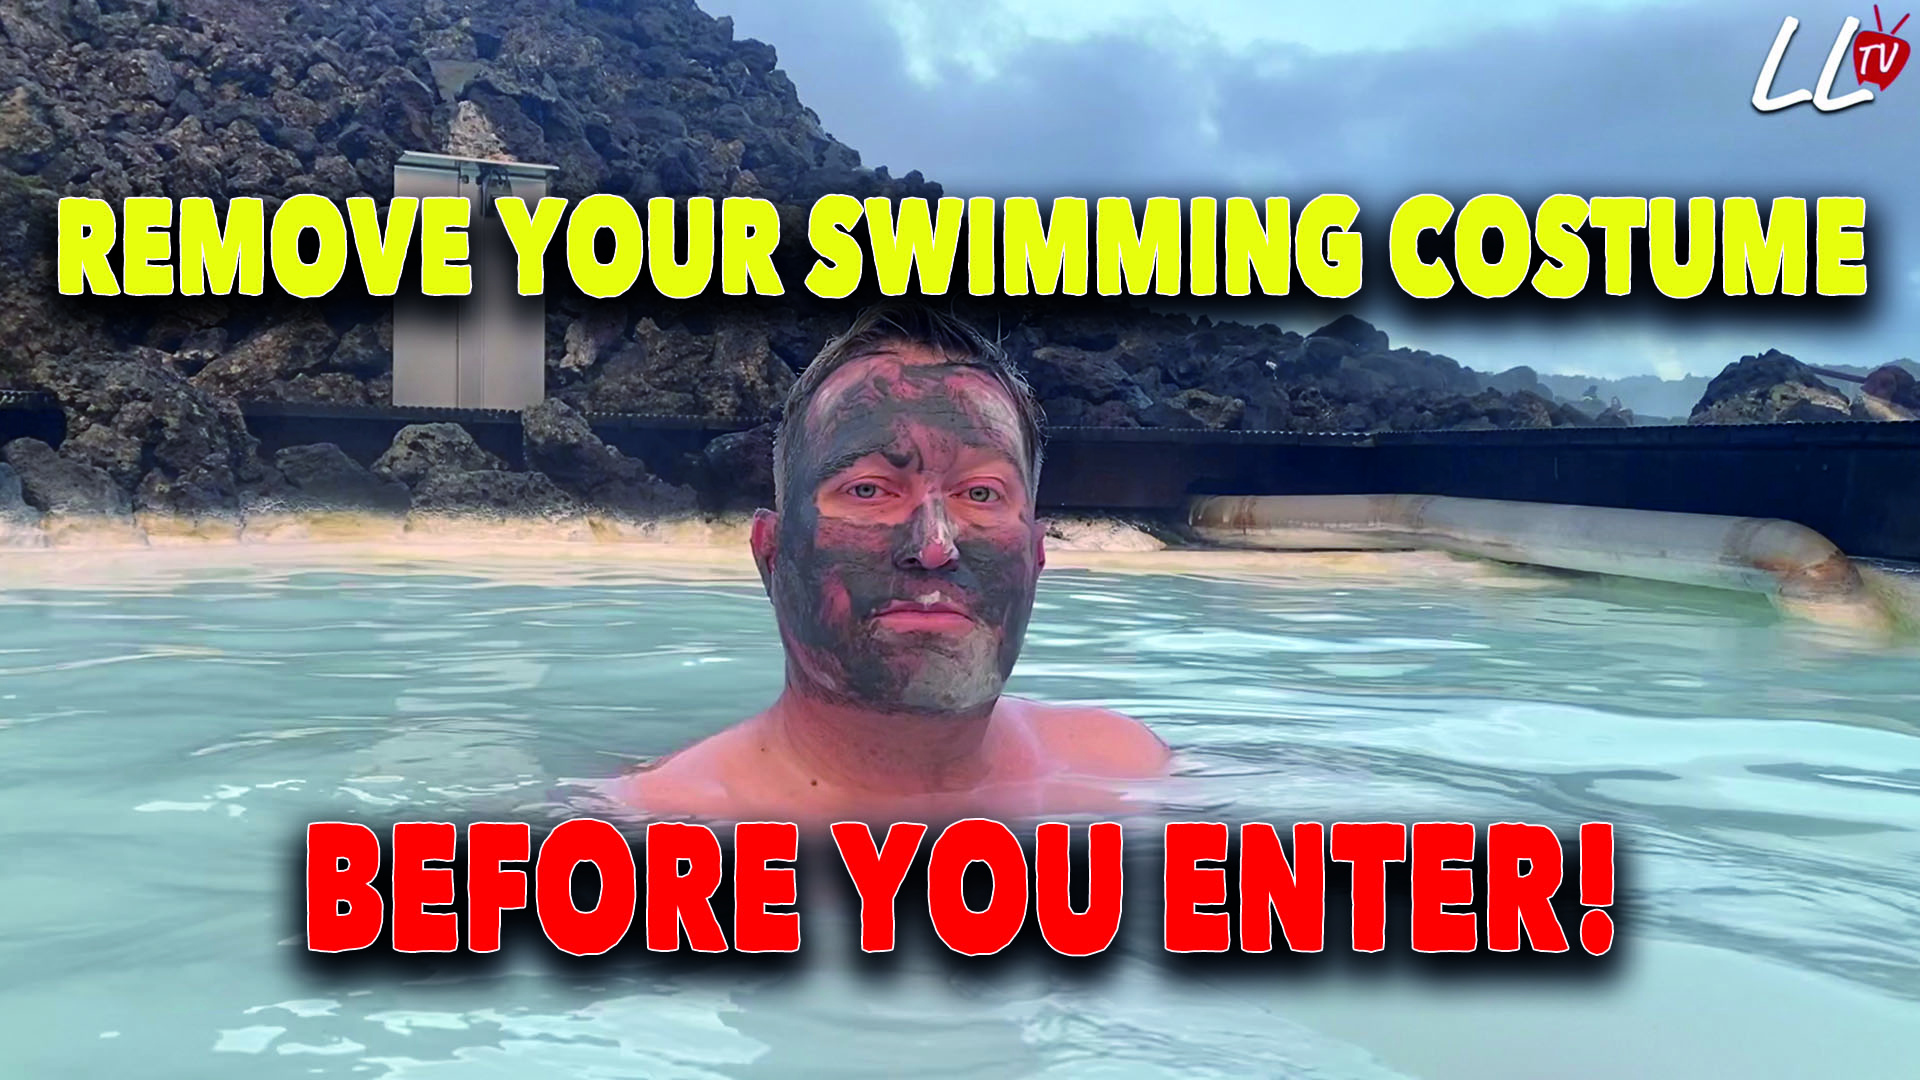 Blue Lagoon – Remove your swimming costume before entering!